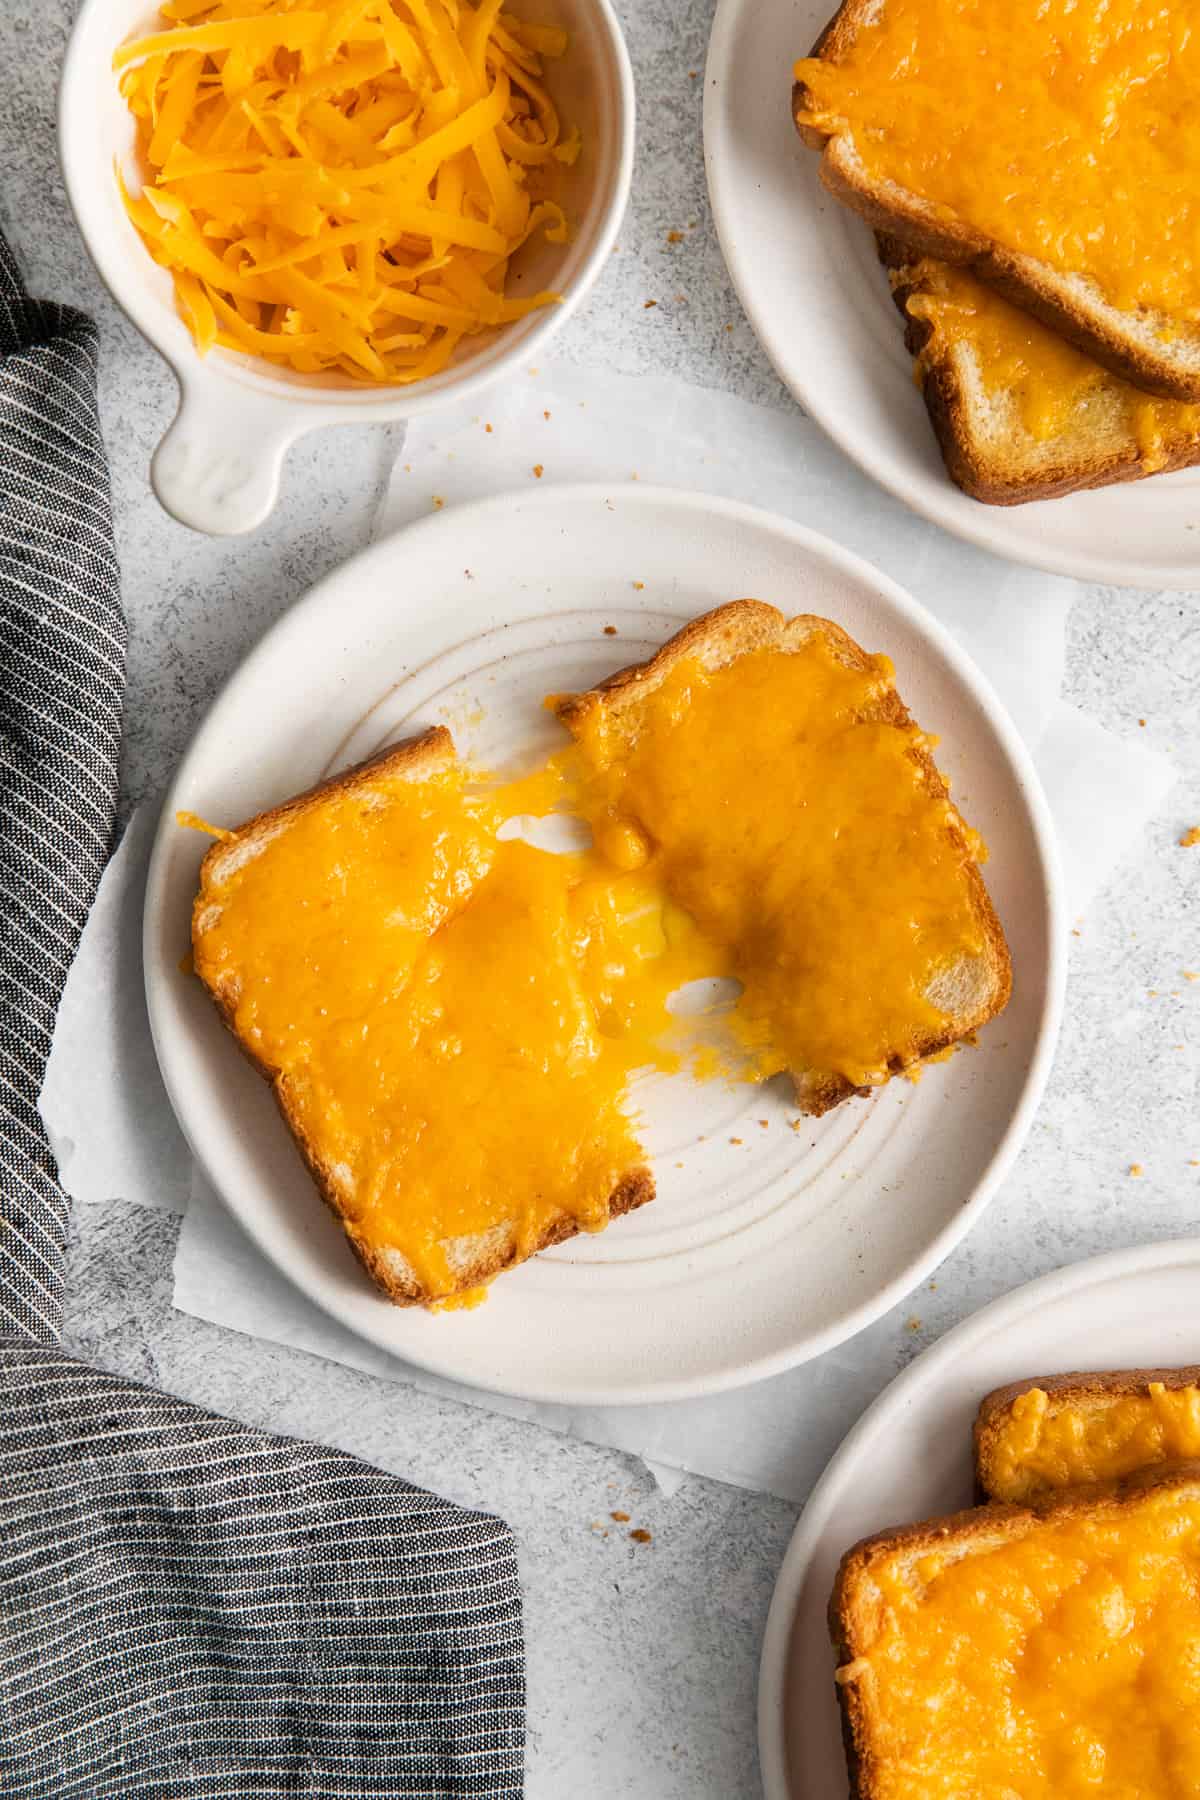 Cheese toast on a plate.